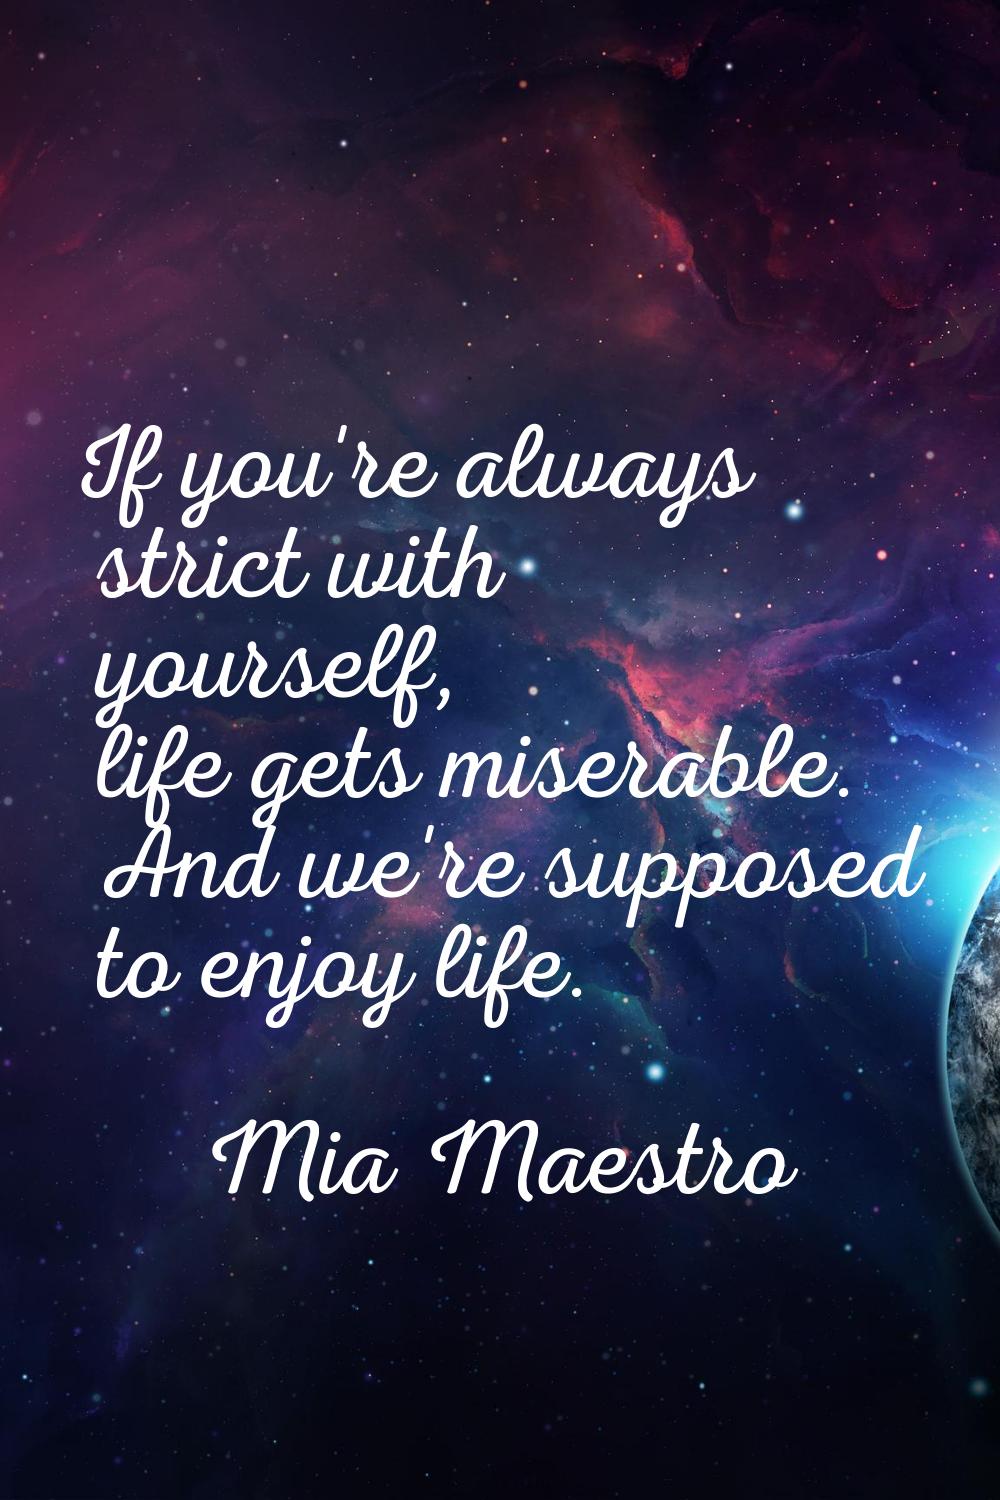 If you're always strict with yourself, life gets miserable. And we're supposed to enjoy life.